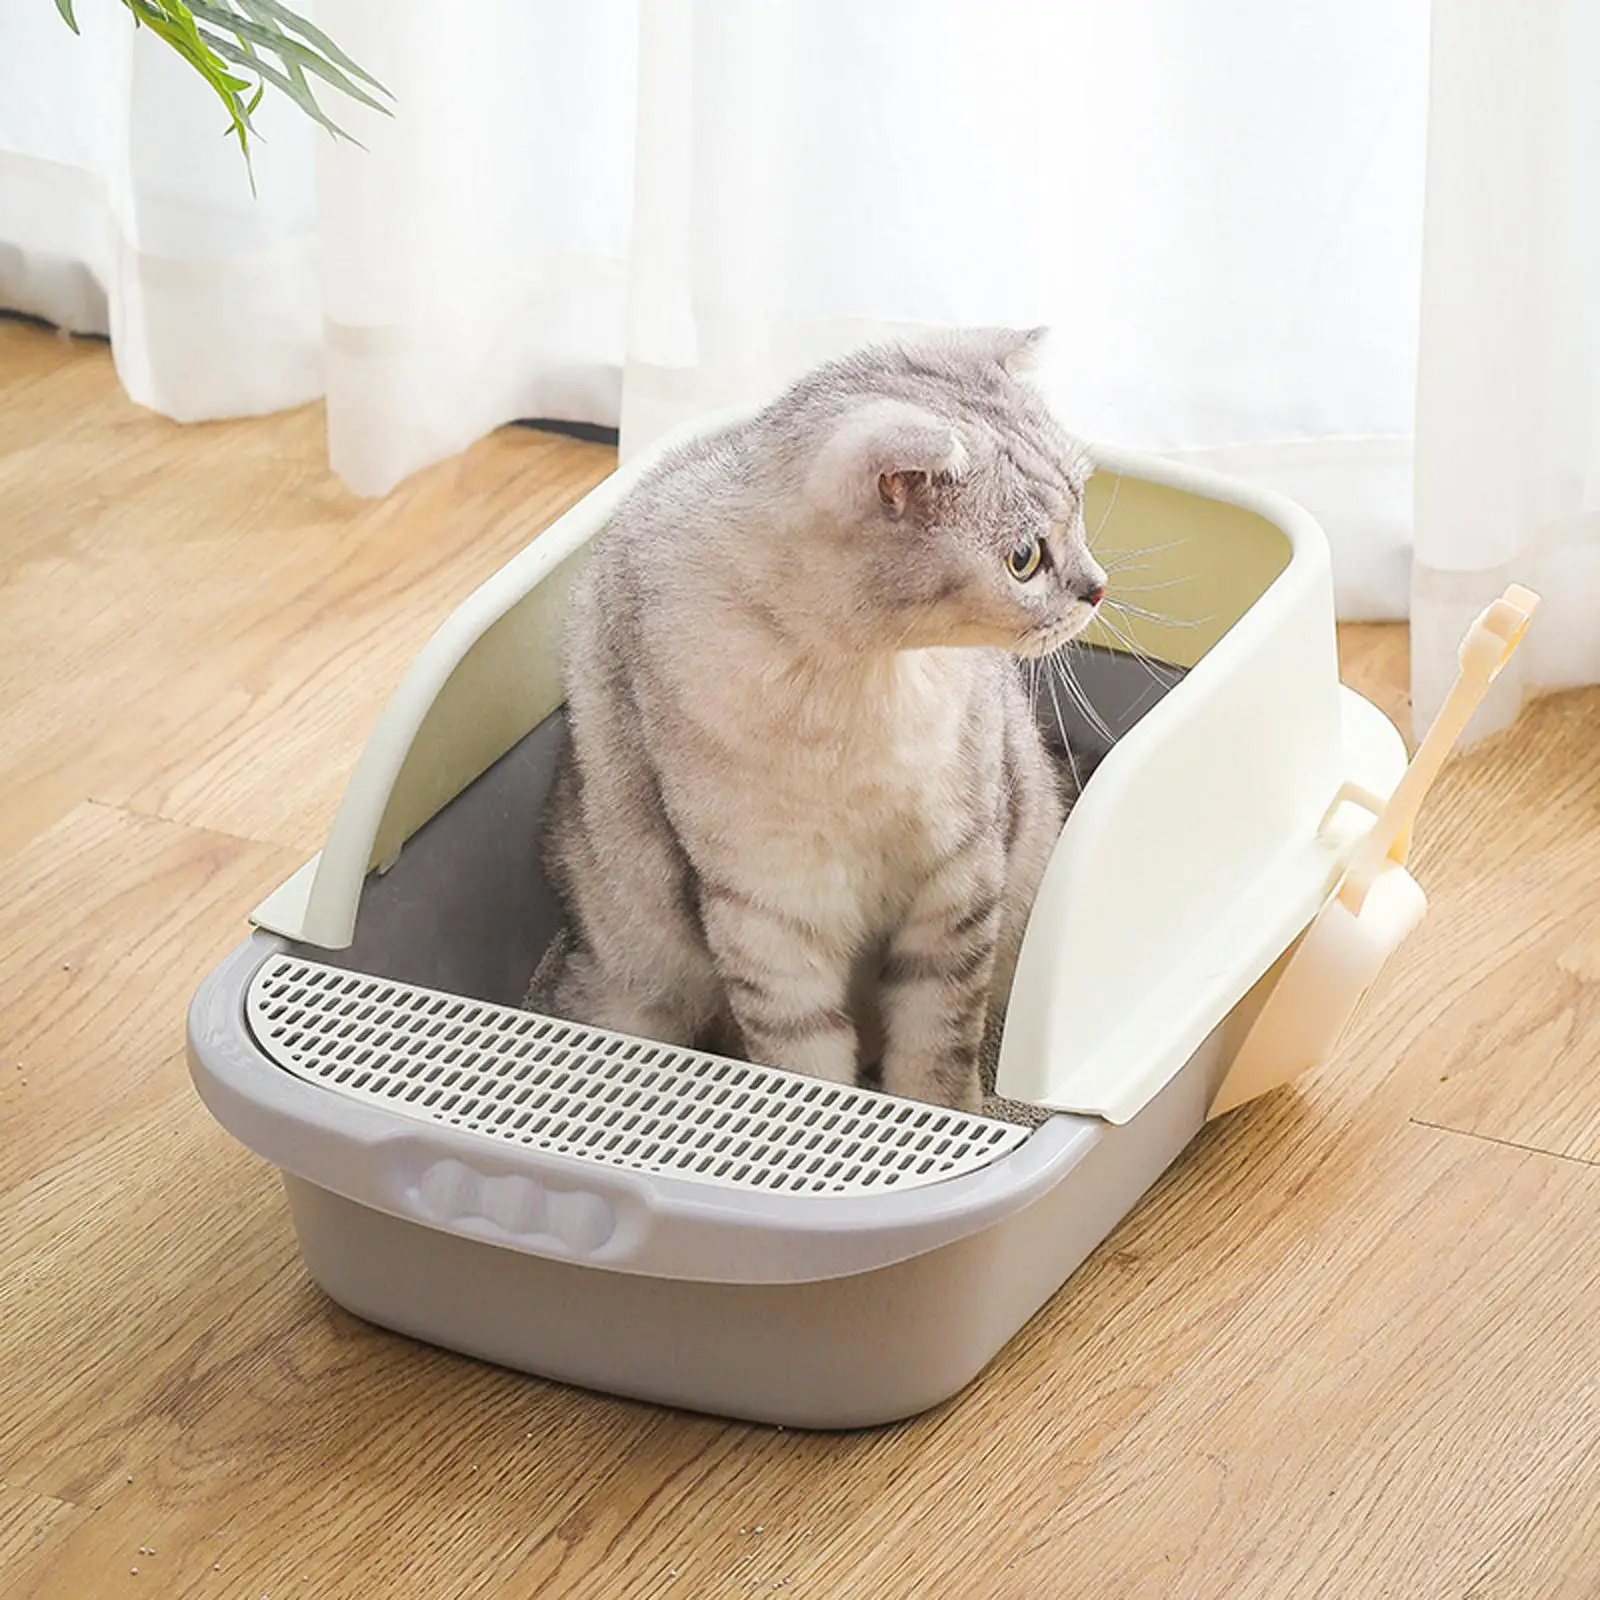 Cat Litter Box, Detachable Design Tray Bedpan Durable High Sided Rim Semi Open Toilet for Cats Supplies